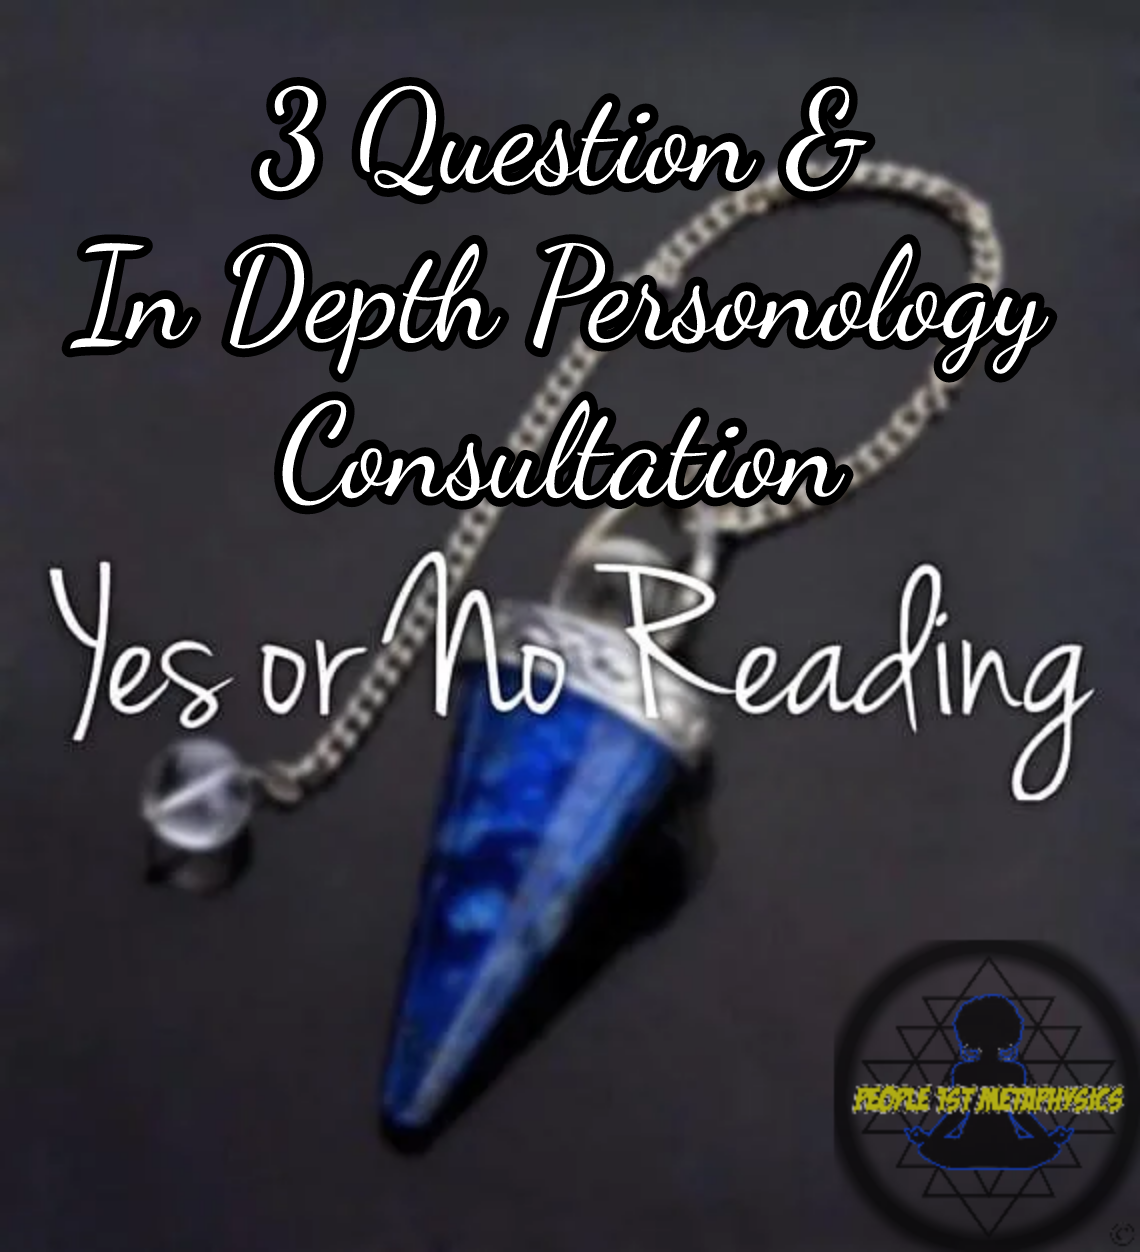 Ask any yes or no question (3 questions & 3 Card Pull) Personology & Mystic Consultation #PsychicReadings #People1stMetaPhysics #PendulumReadings #Energy